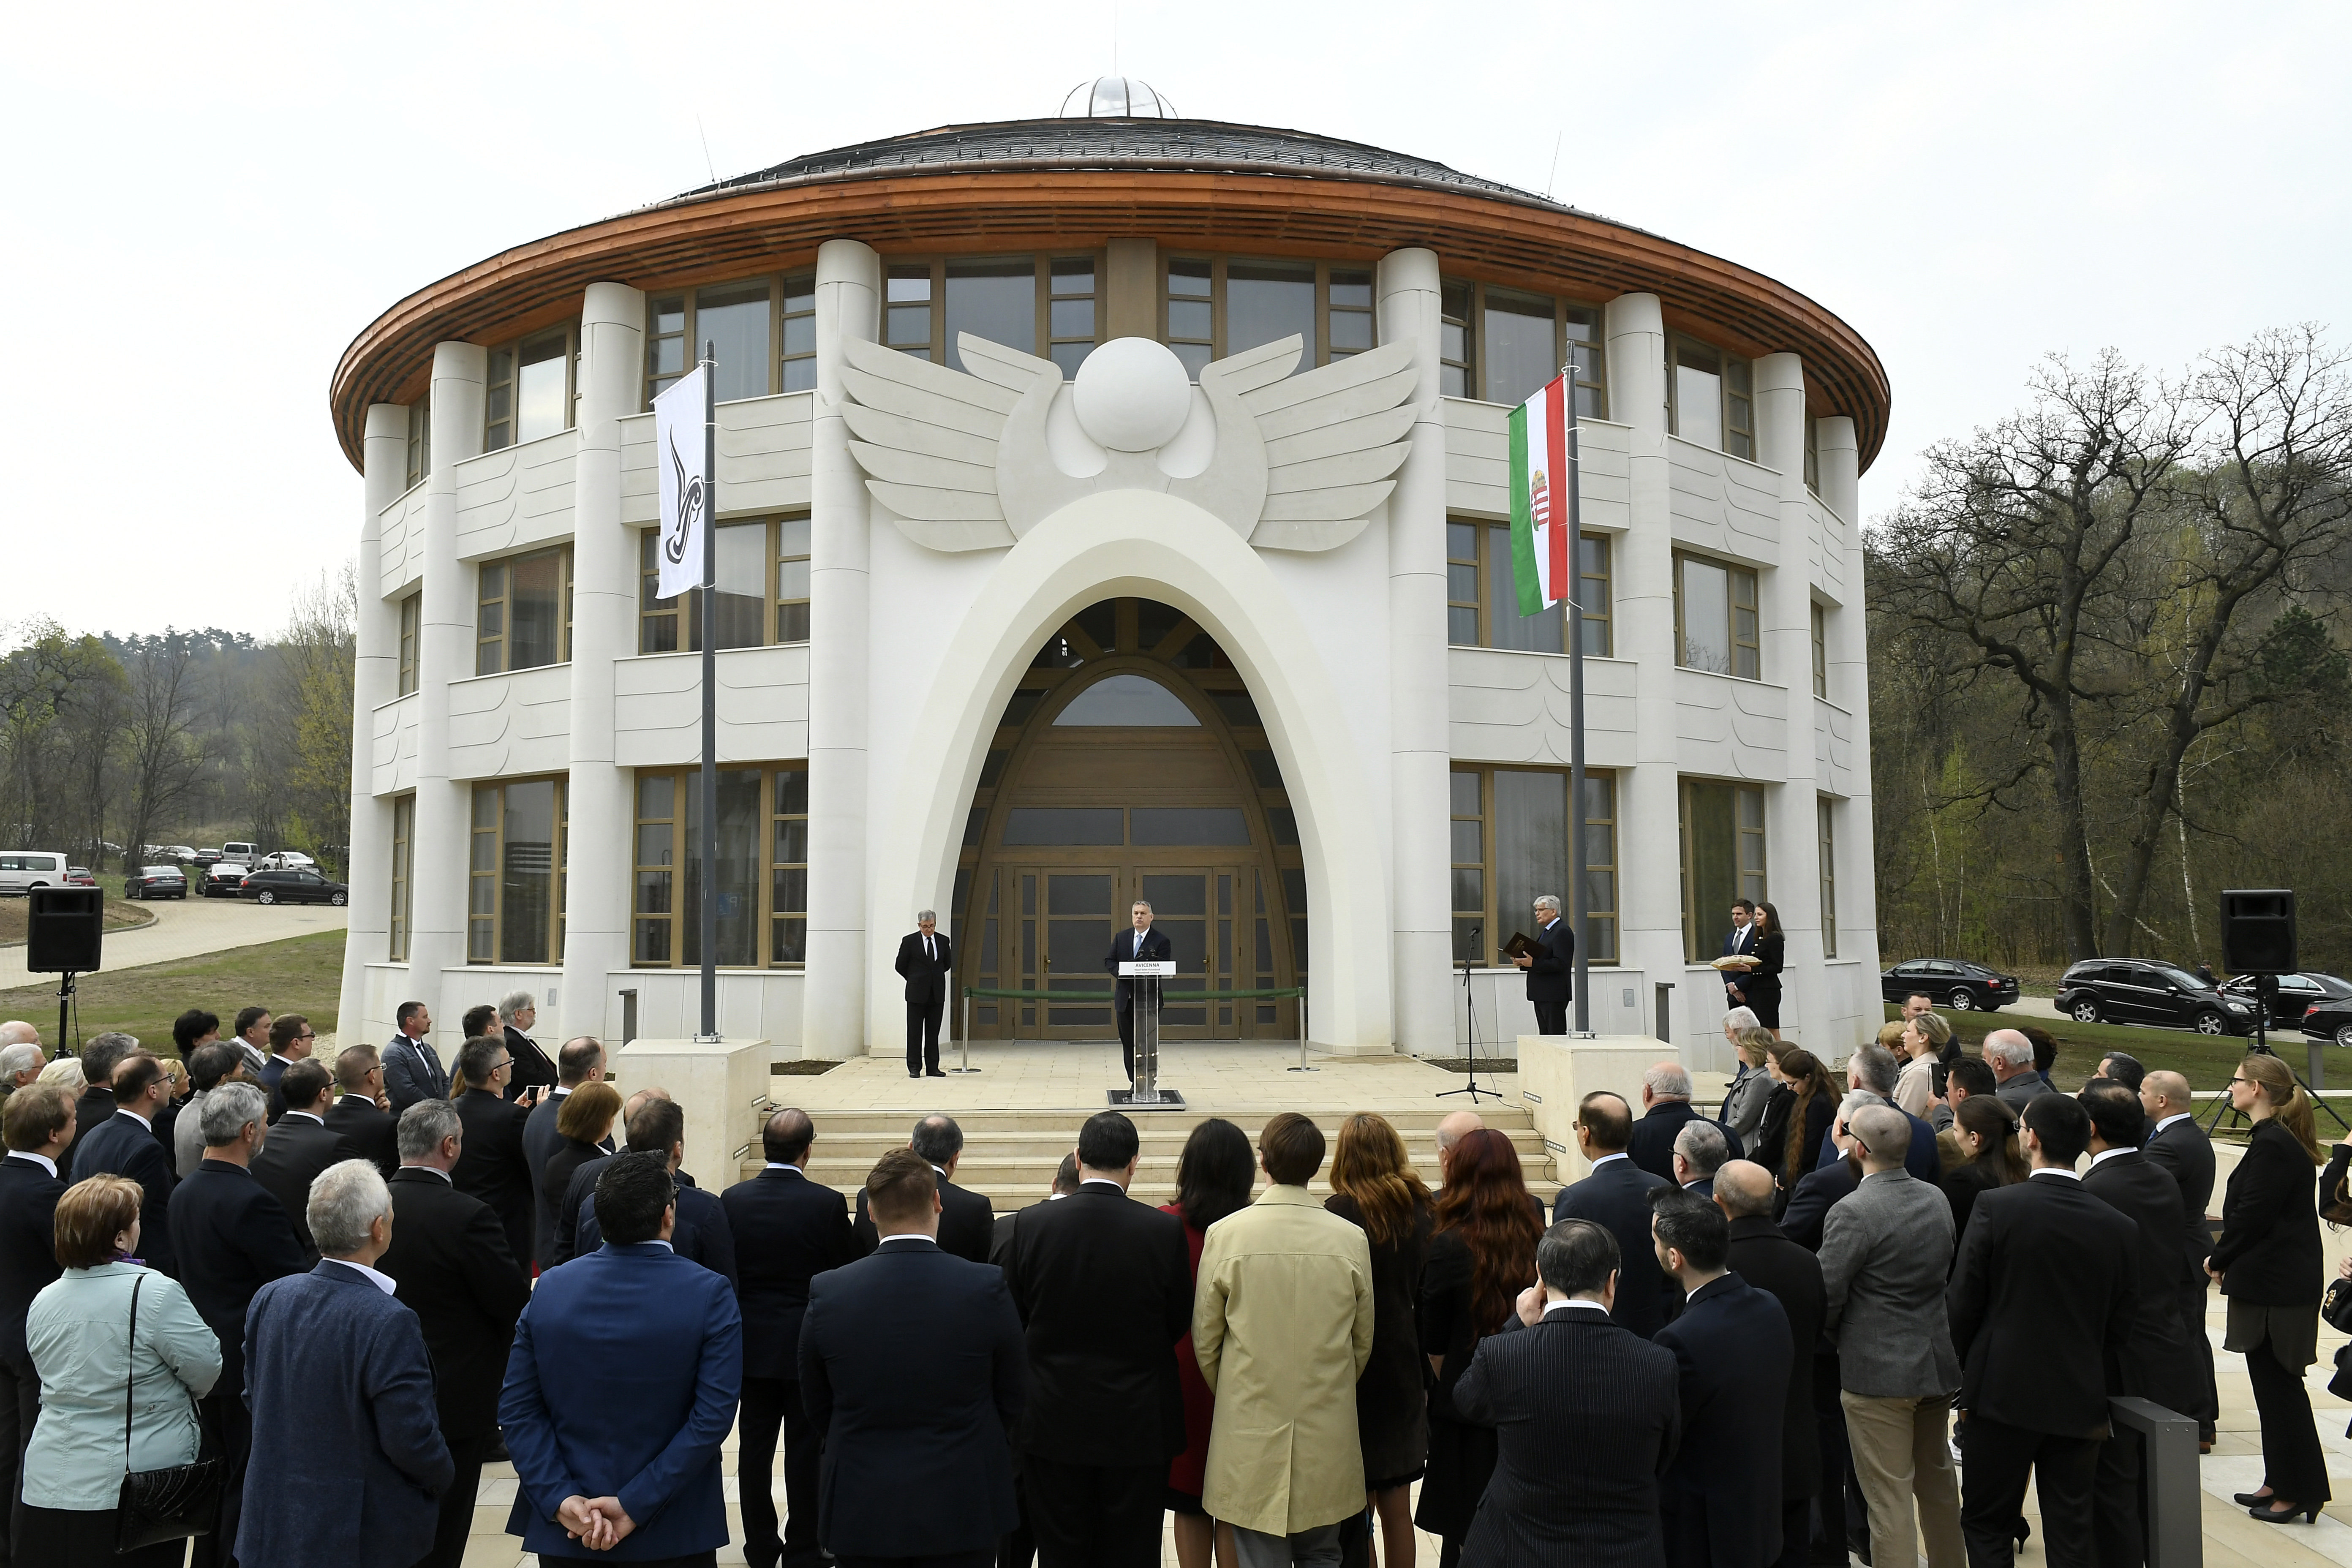 Orbán inaugurates Avicenna Institute of Middle Eastern Studies in Piliscsaba